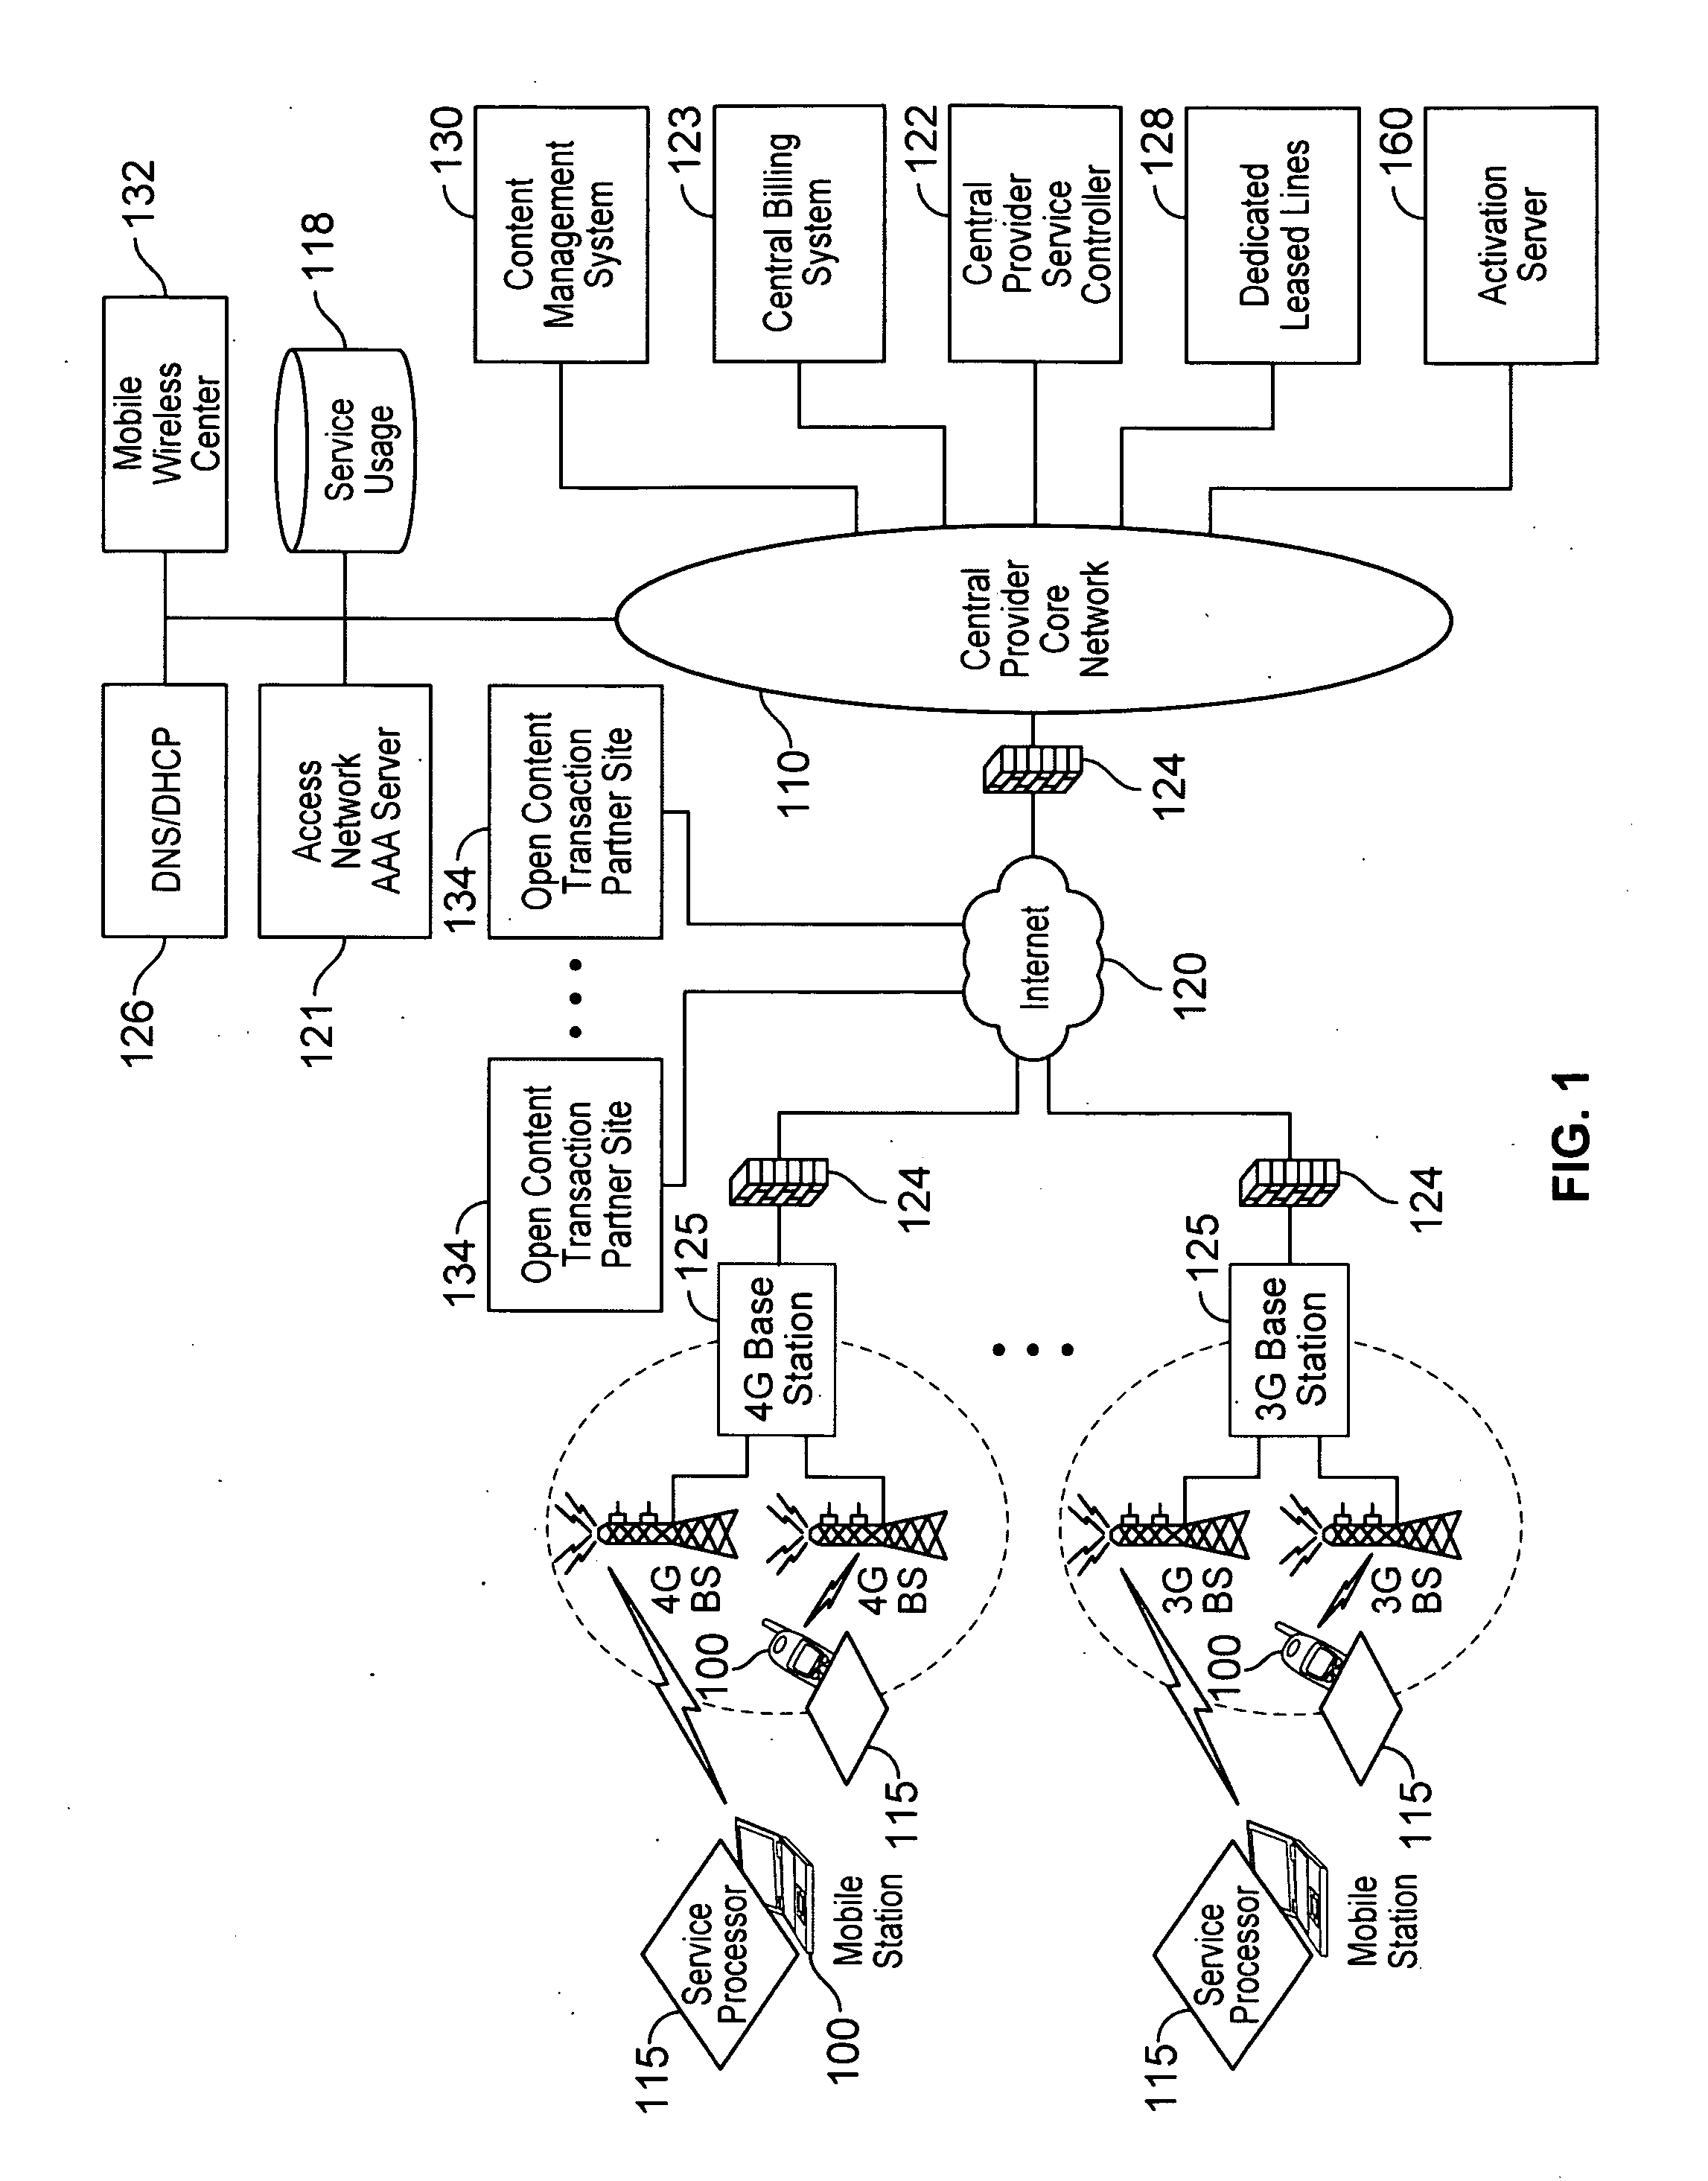 Device assisted service profile management with user preference, adaptive policy, network neutrality, and user privacy